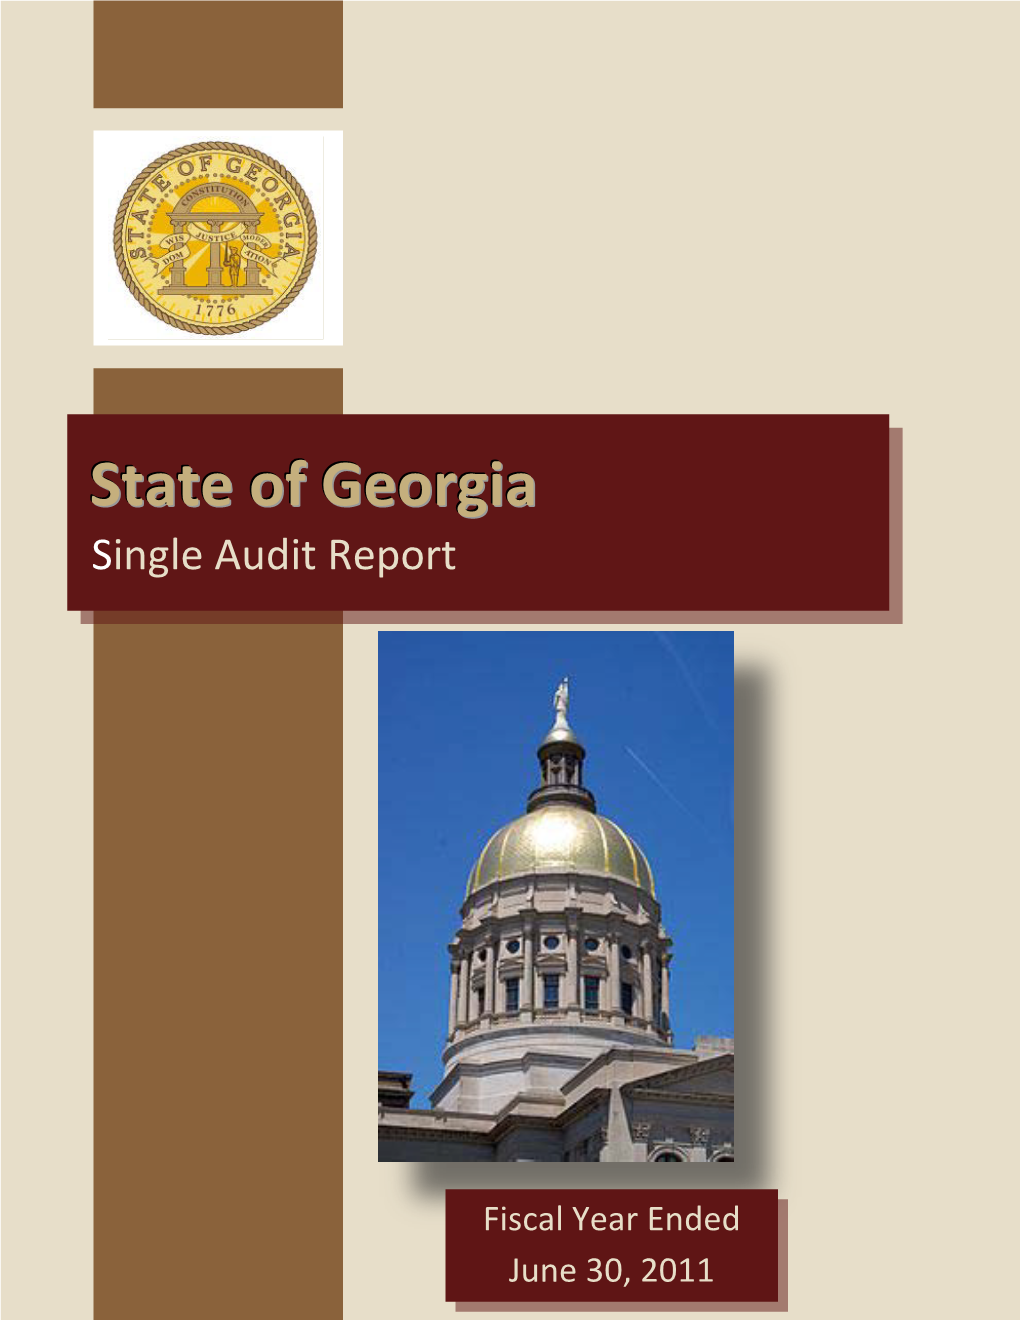 State of Georgia Single Audit Report Fiscal Year Ended June 30, 2011